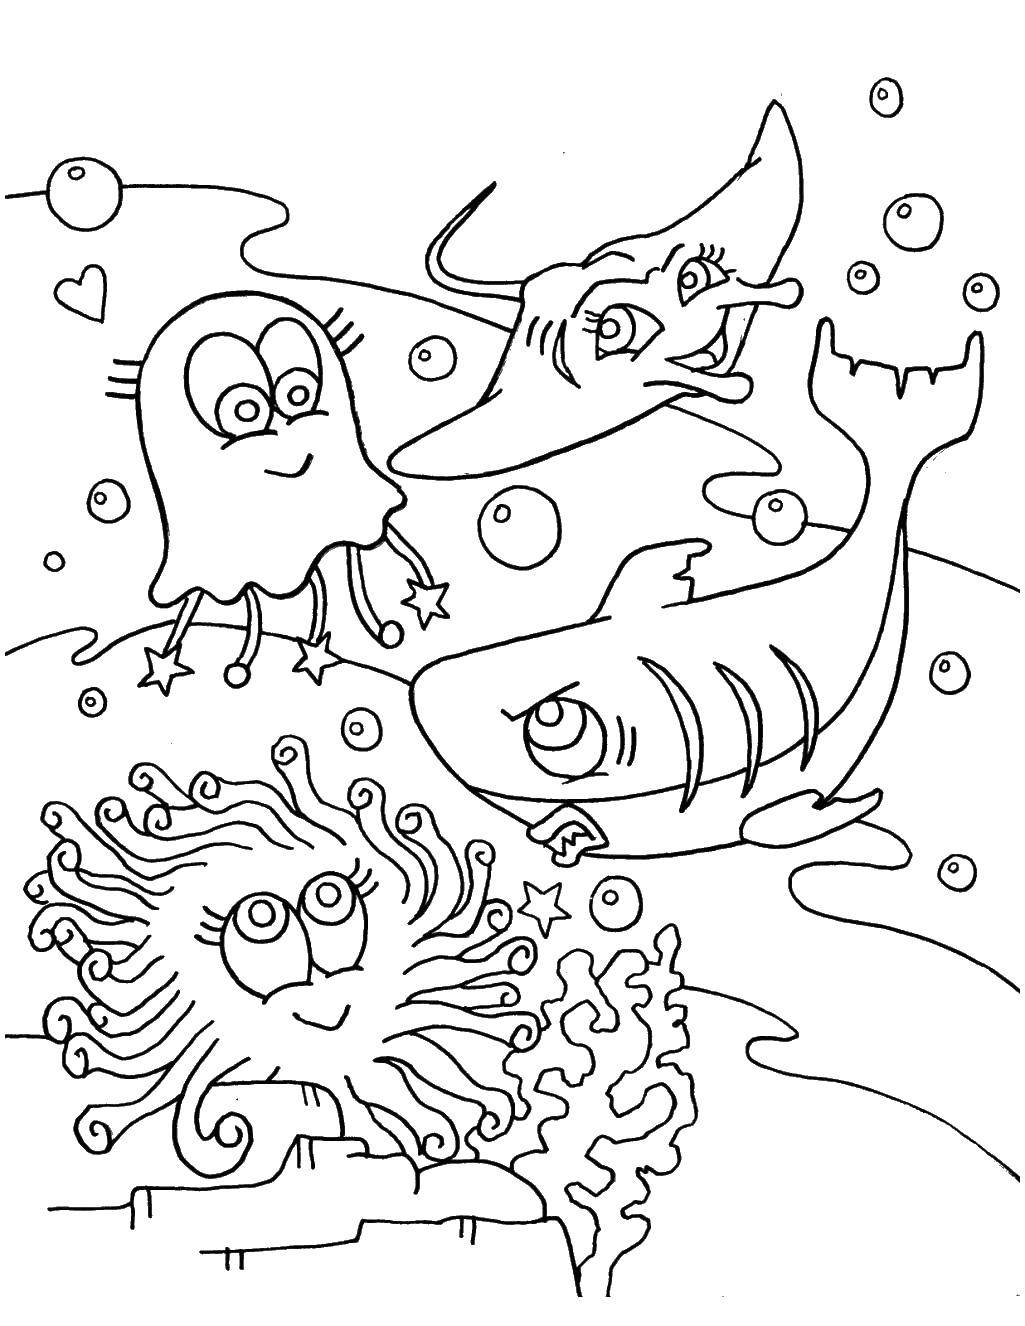 Coloring Medusa fell in love with the shark. Category Marine animals. Tags:  Underwater world, fish.